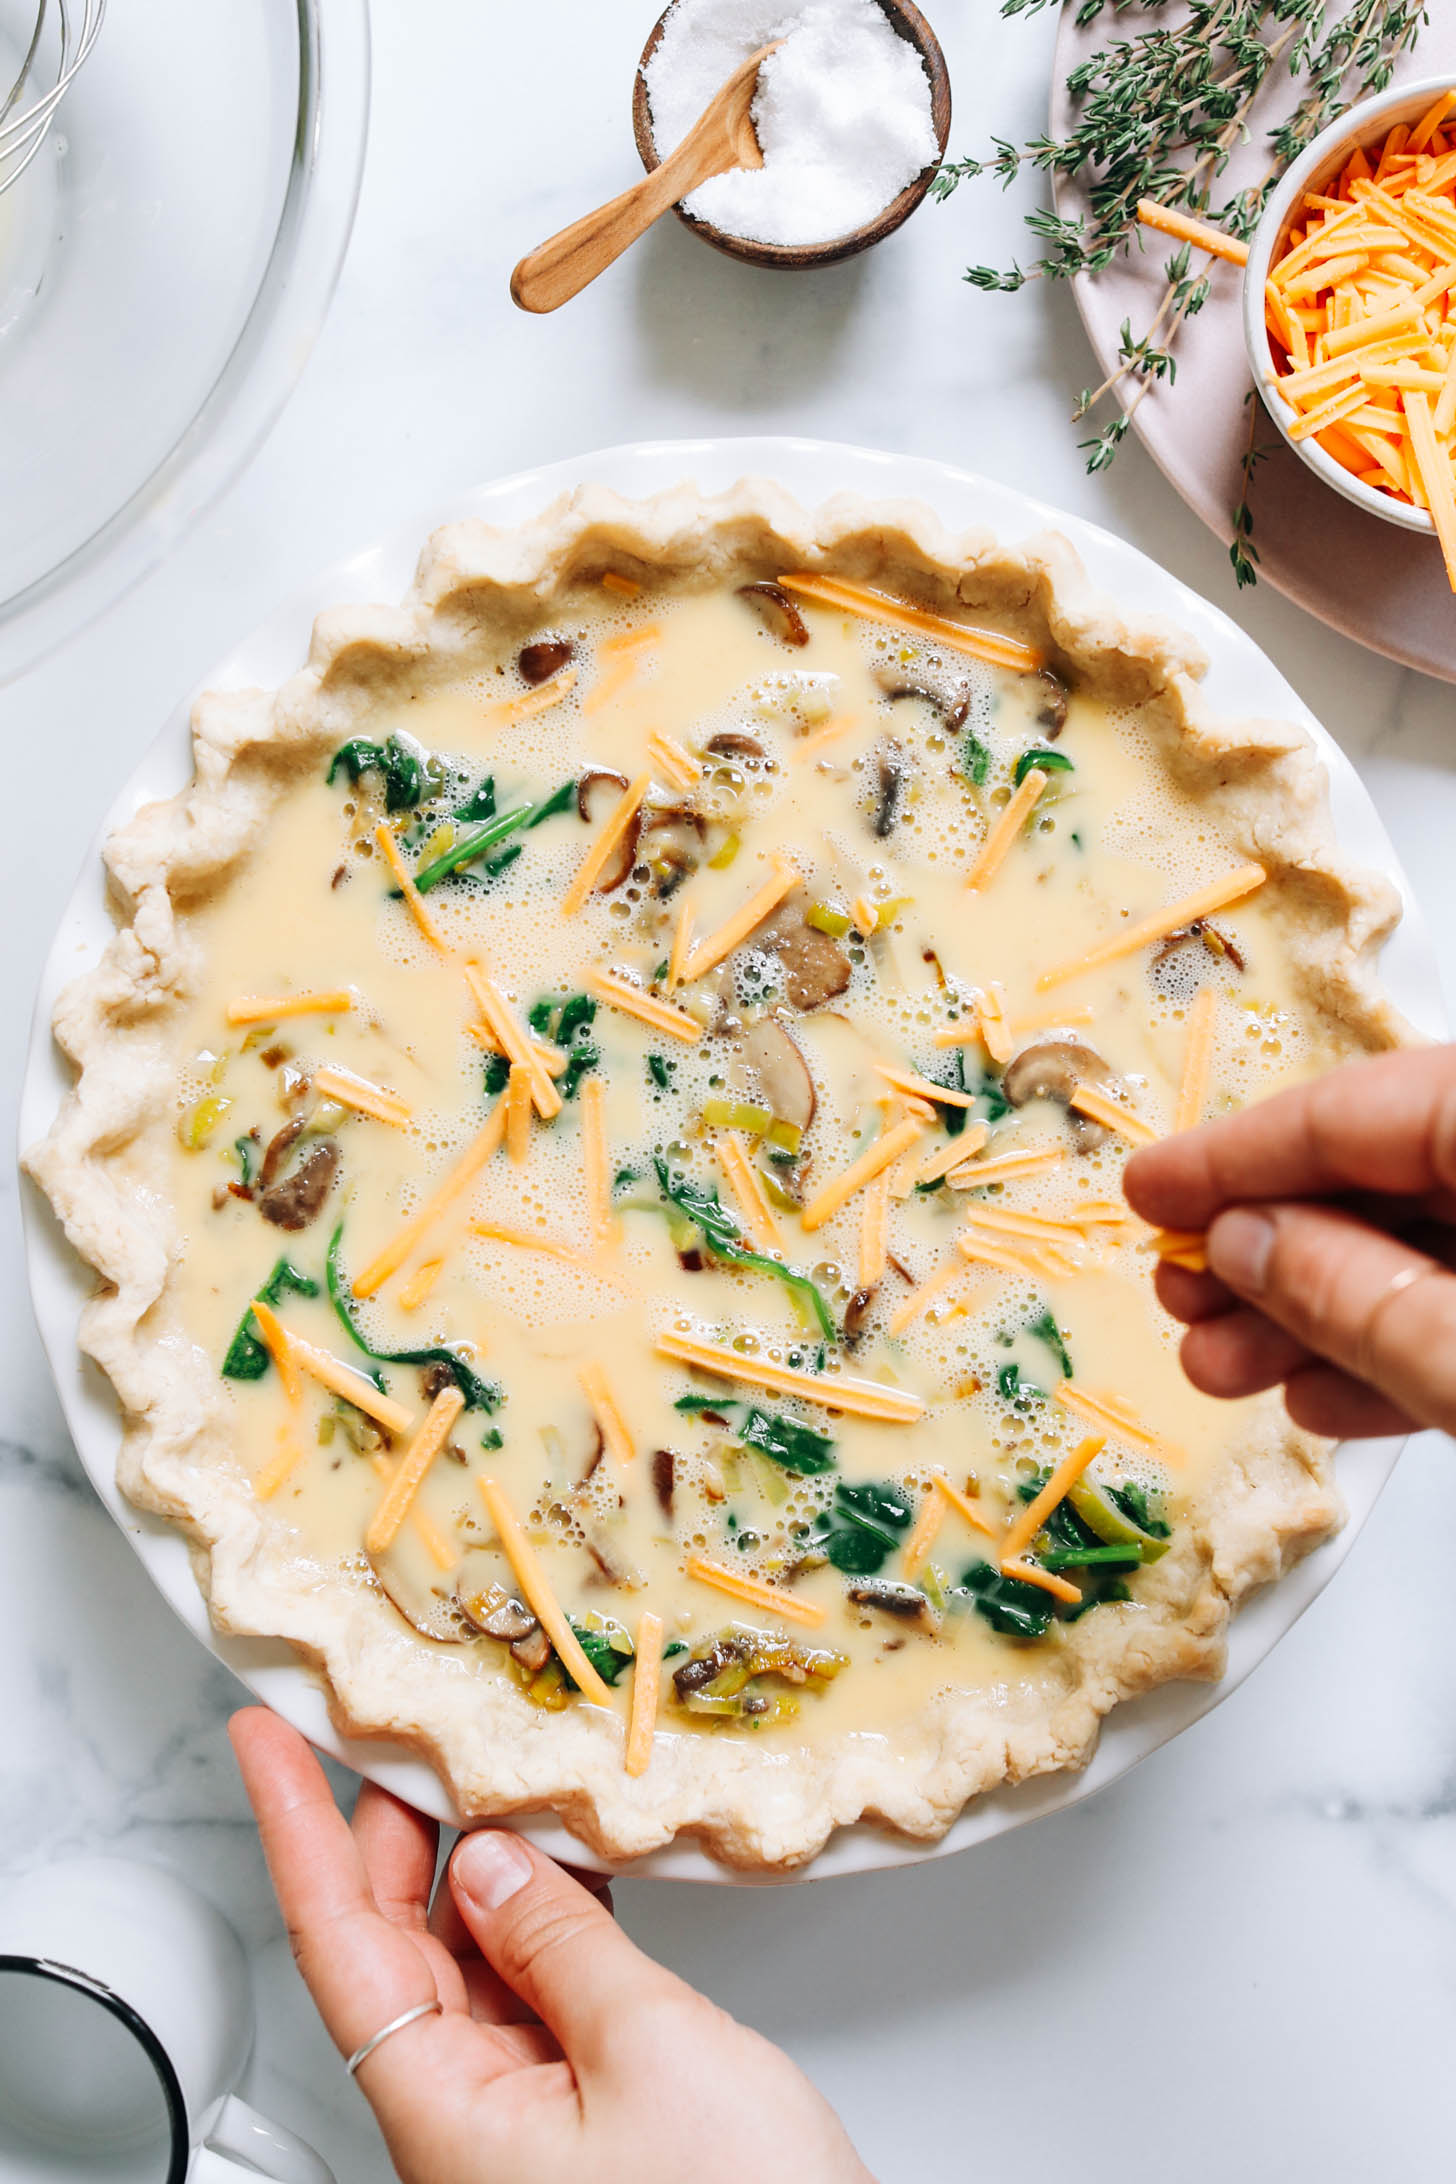 Sprinkling shredded dairy-free cheese over a quiche